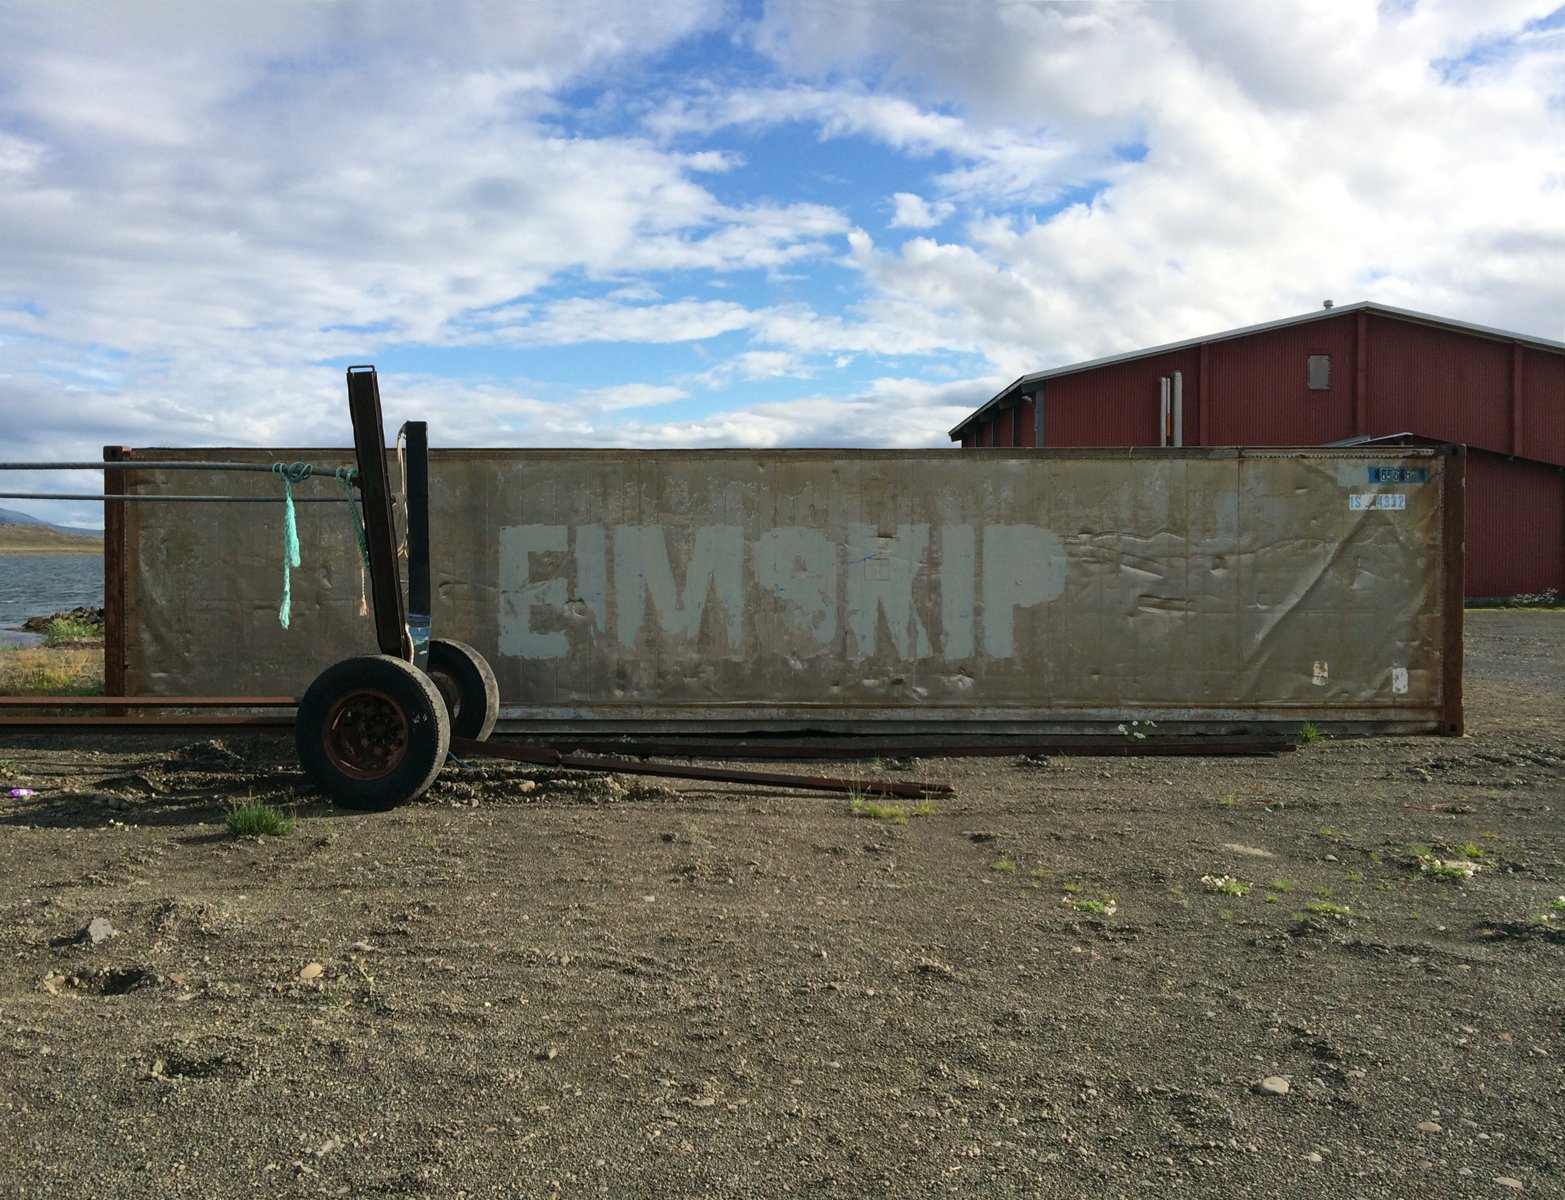 A silver-colored aluminum shipping container with “Eimskip” painted on the side.